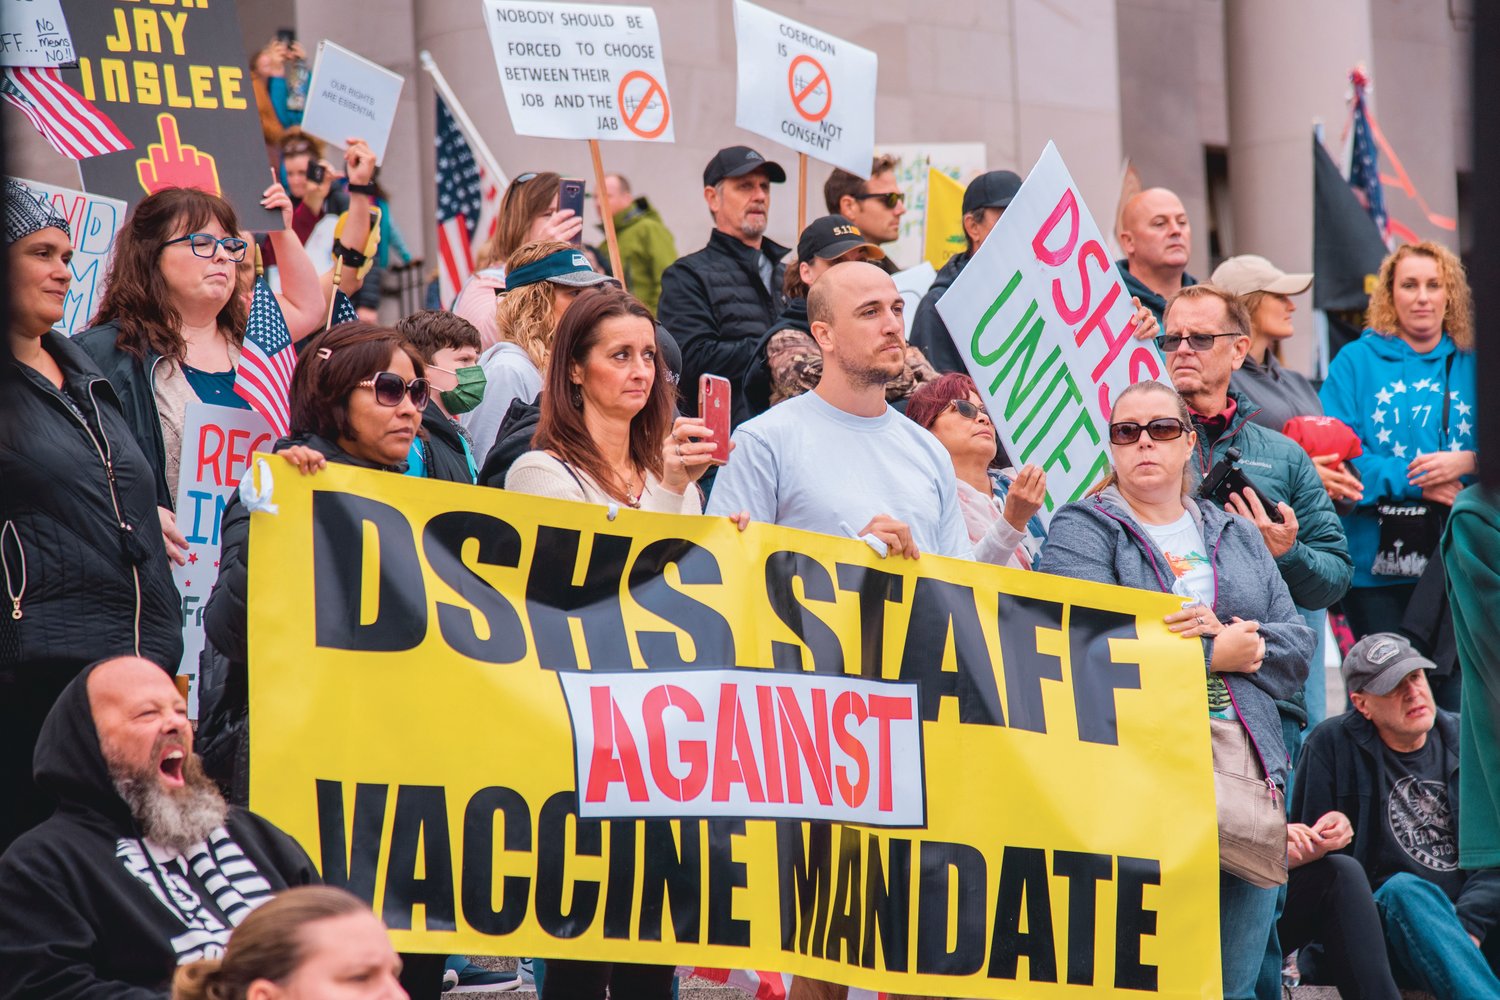 Washington Department of Social and Health Services employees against the vaccine mandate stand and hold signs alongside other rally goers on the steps of the Washington State Capitol Building in Olympia on Sunday.